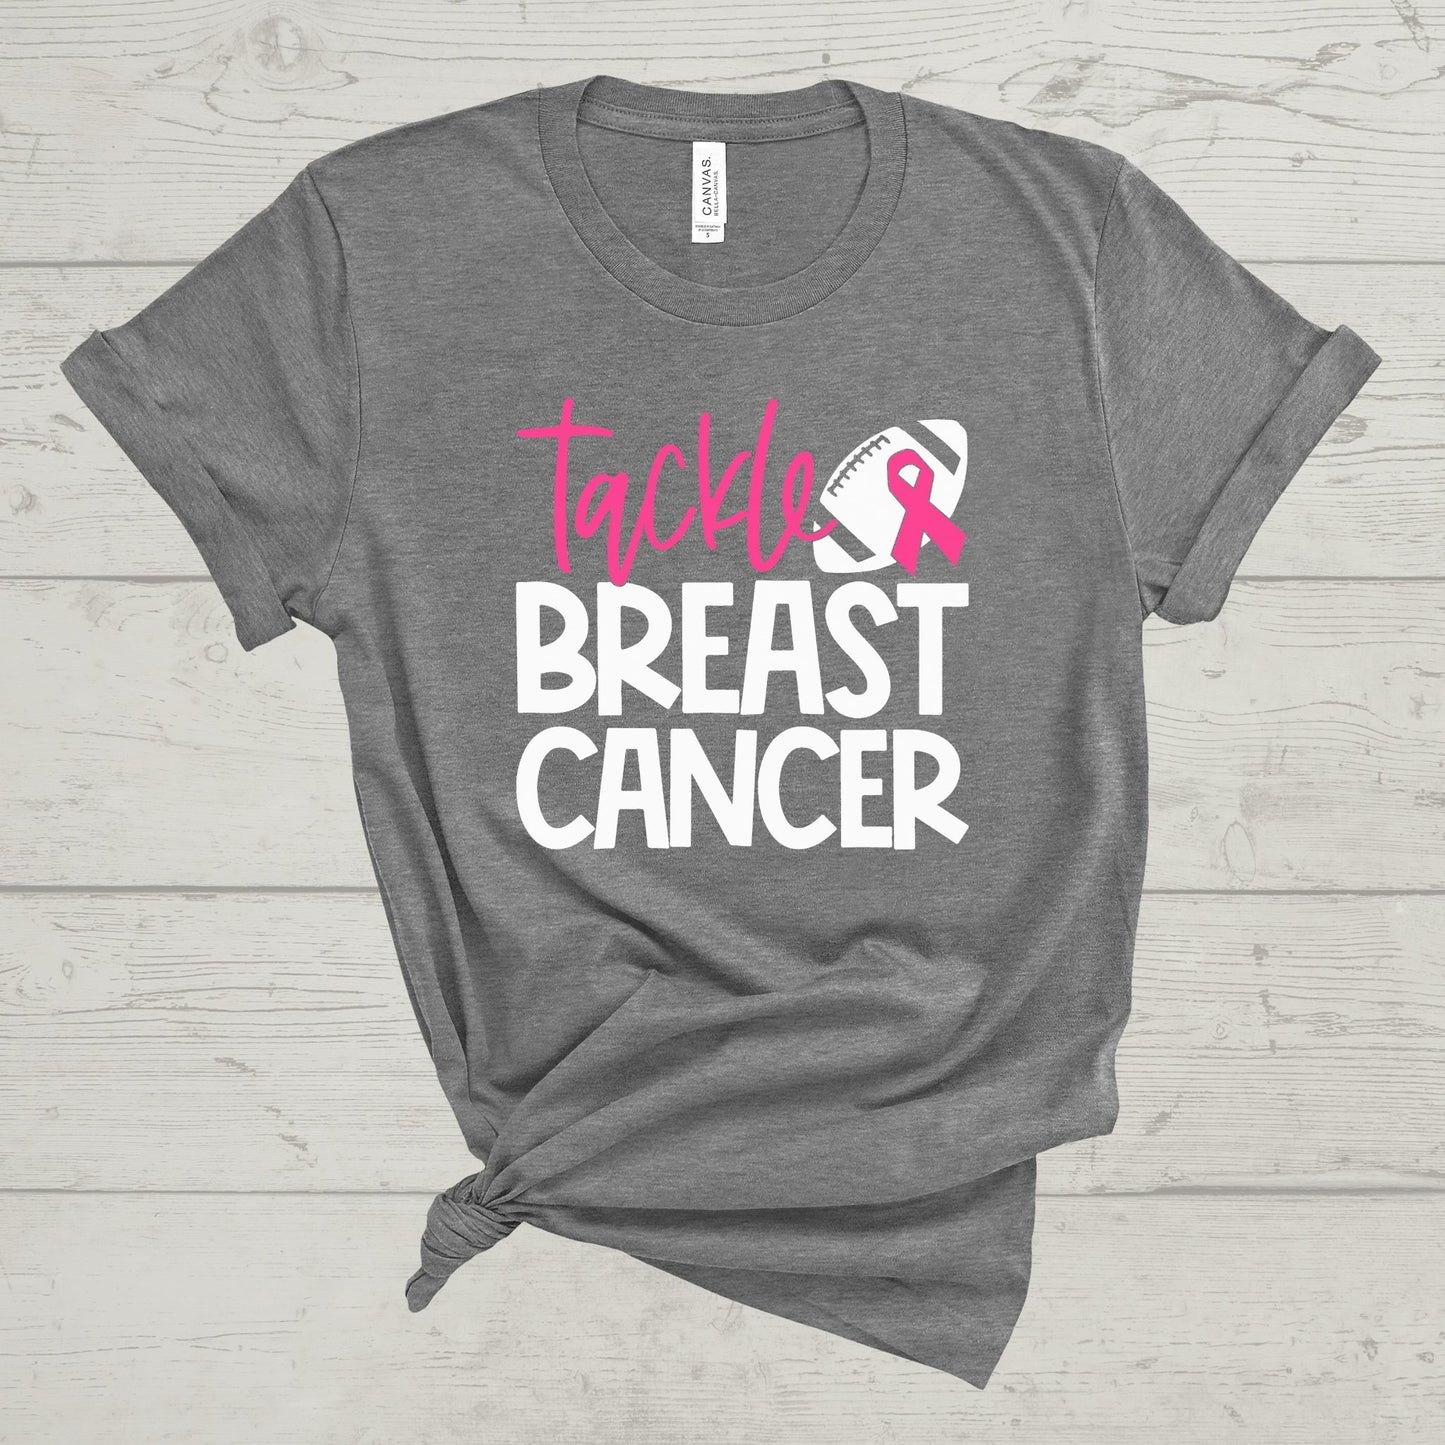 TACKLE BREAST CANCER TEE-BREAST CANCER AWARENESS